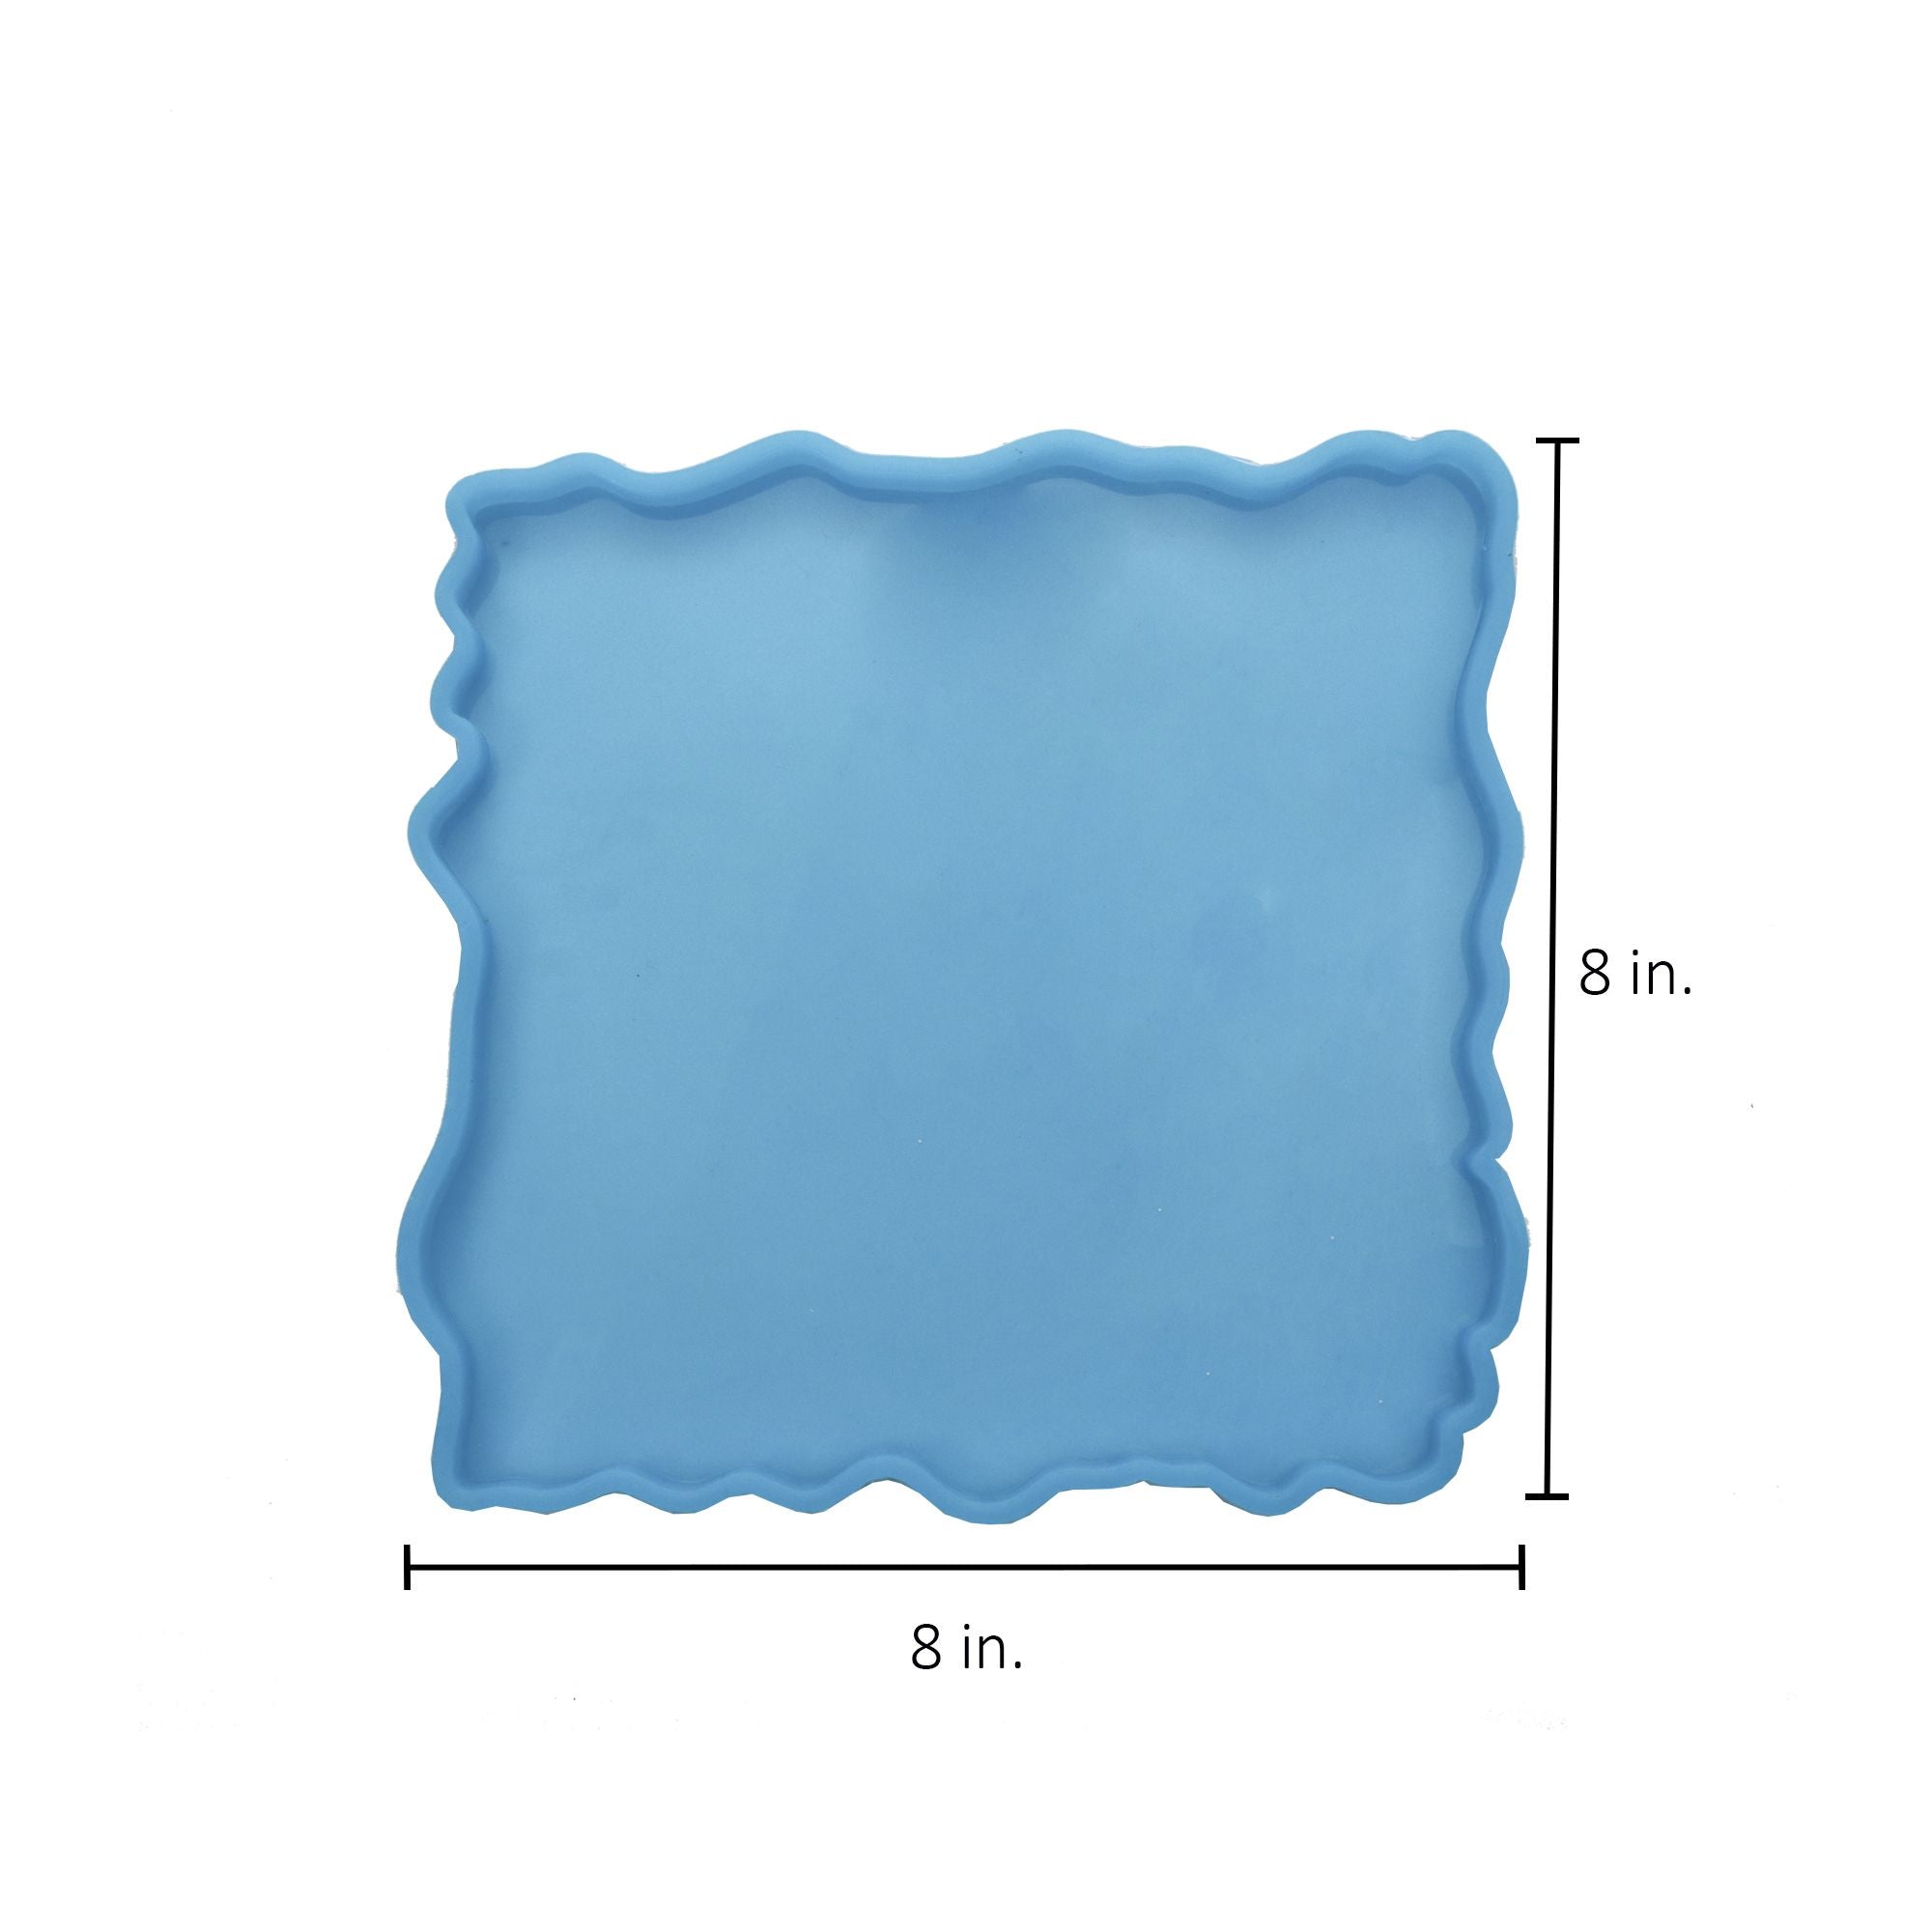 Silicone Mould Whimsy Square L-8 Inch W-8Inch D-10.16Mm 1Pc Ib